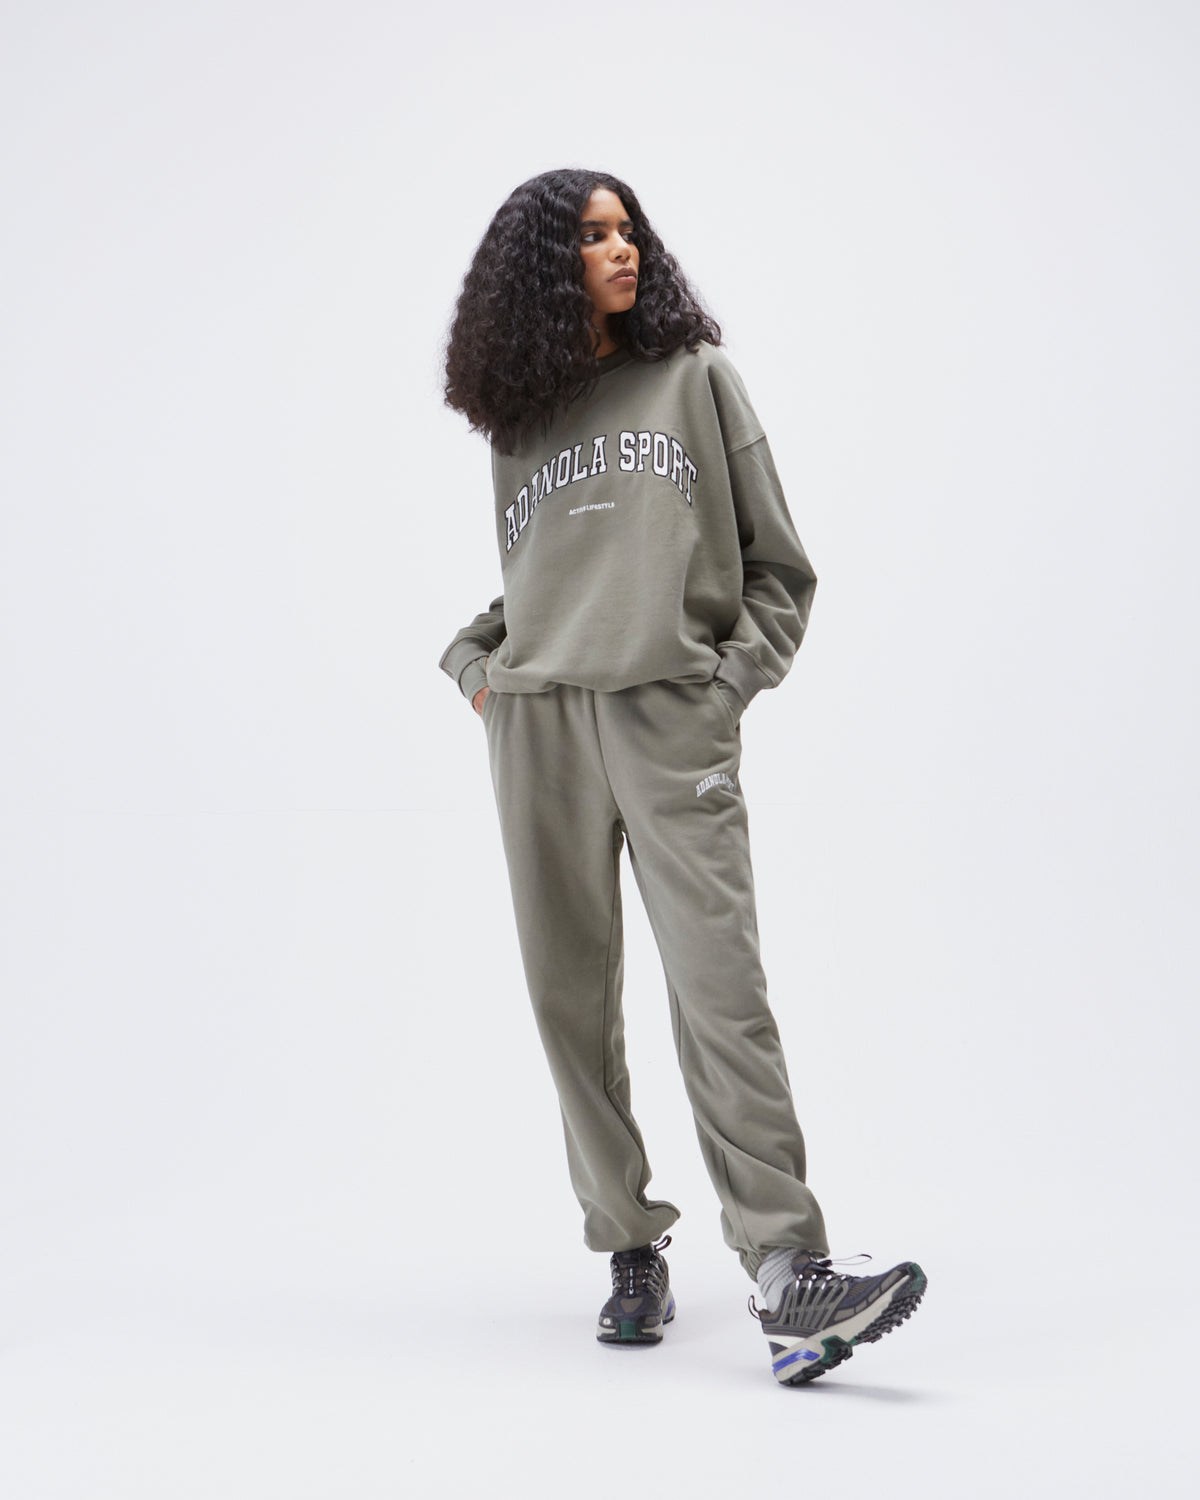 Stay stylish and comfortable with Avia Olive Green Jogger Pants